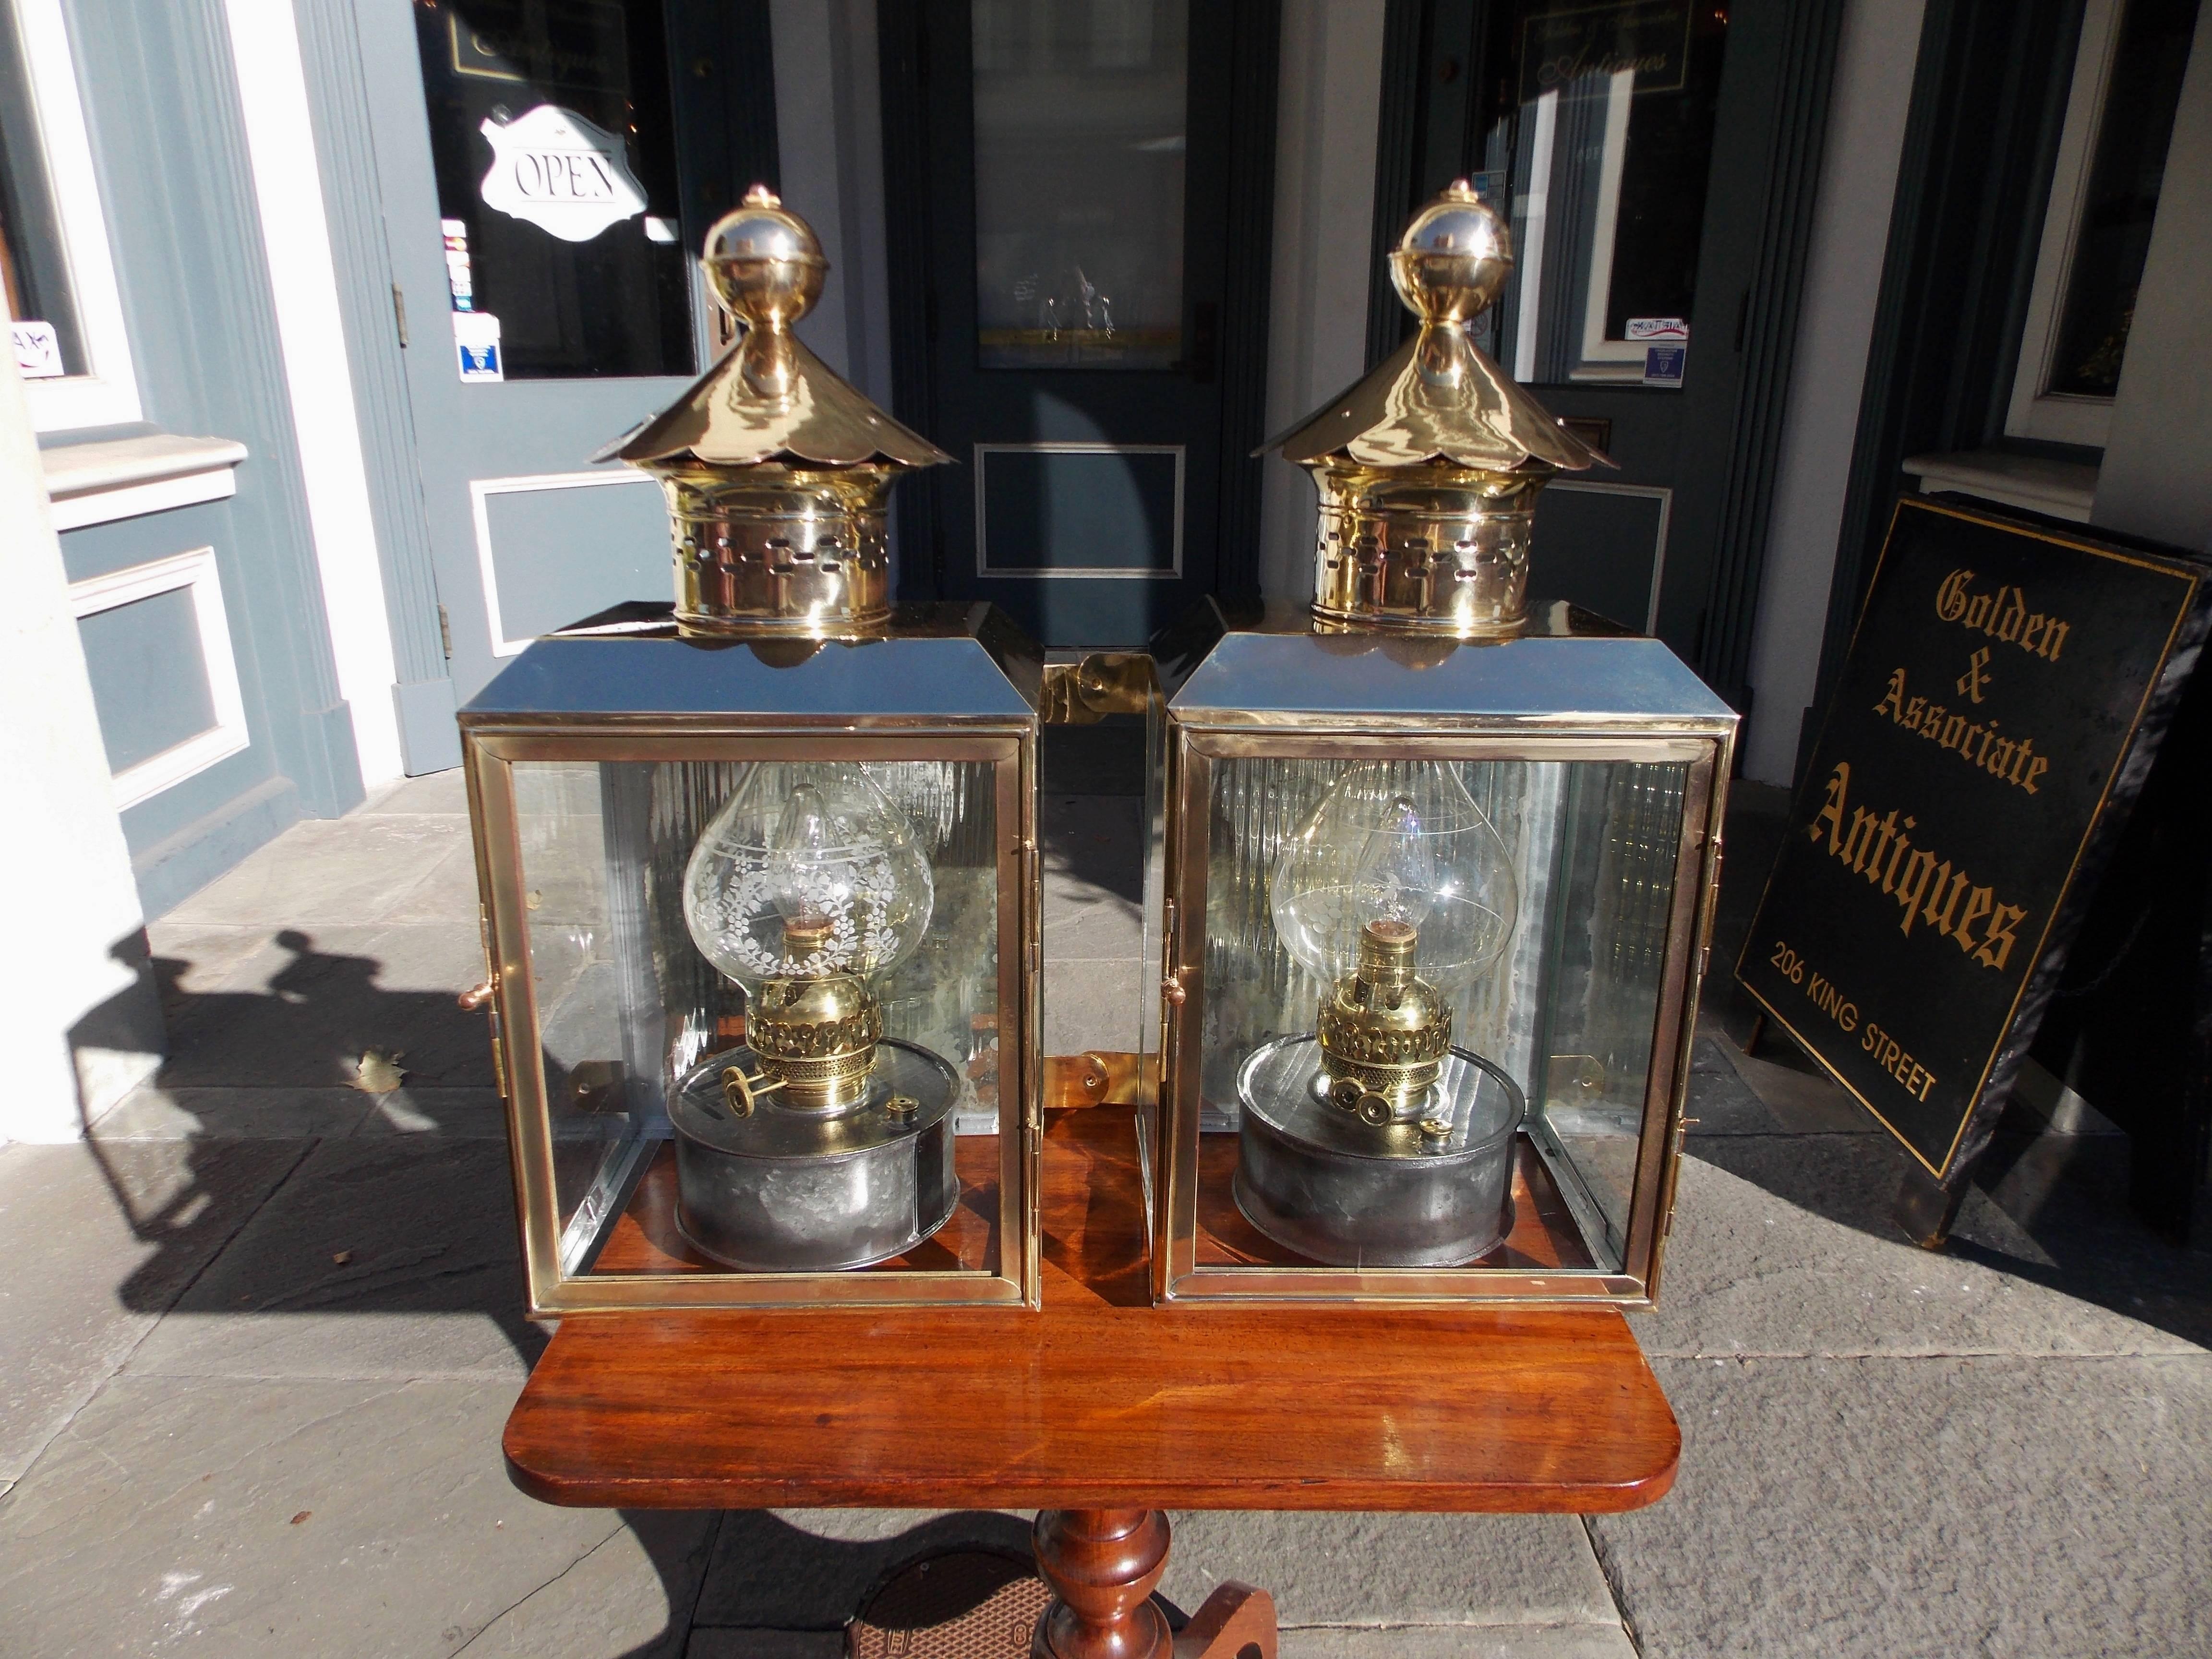 Pair of American brass and polished steel wall lanterns with vented finial domes, glass case panels with a hinged door, side mounting brackets, and the original polished steel kerosene burners with acid etched shades. Lanterns have been converted to